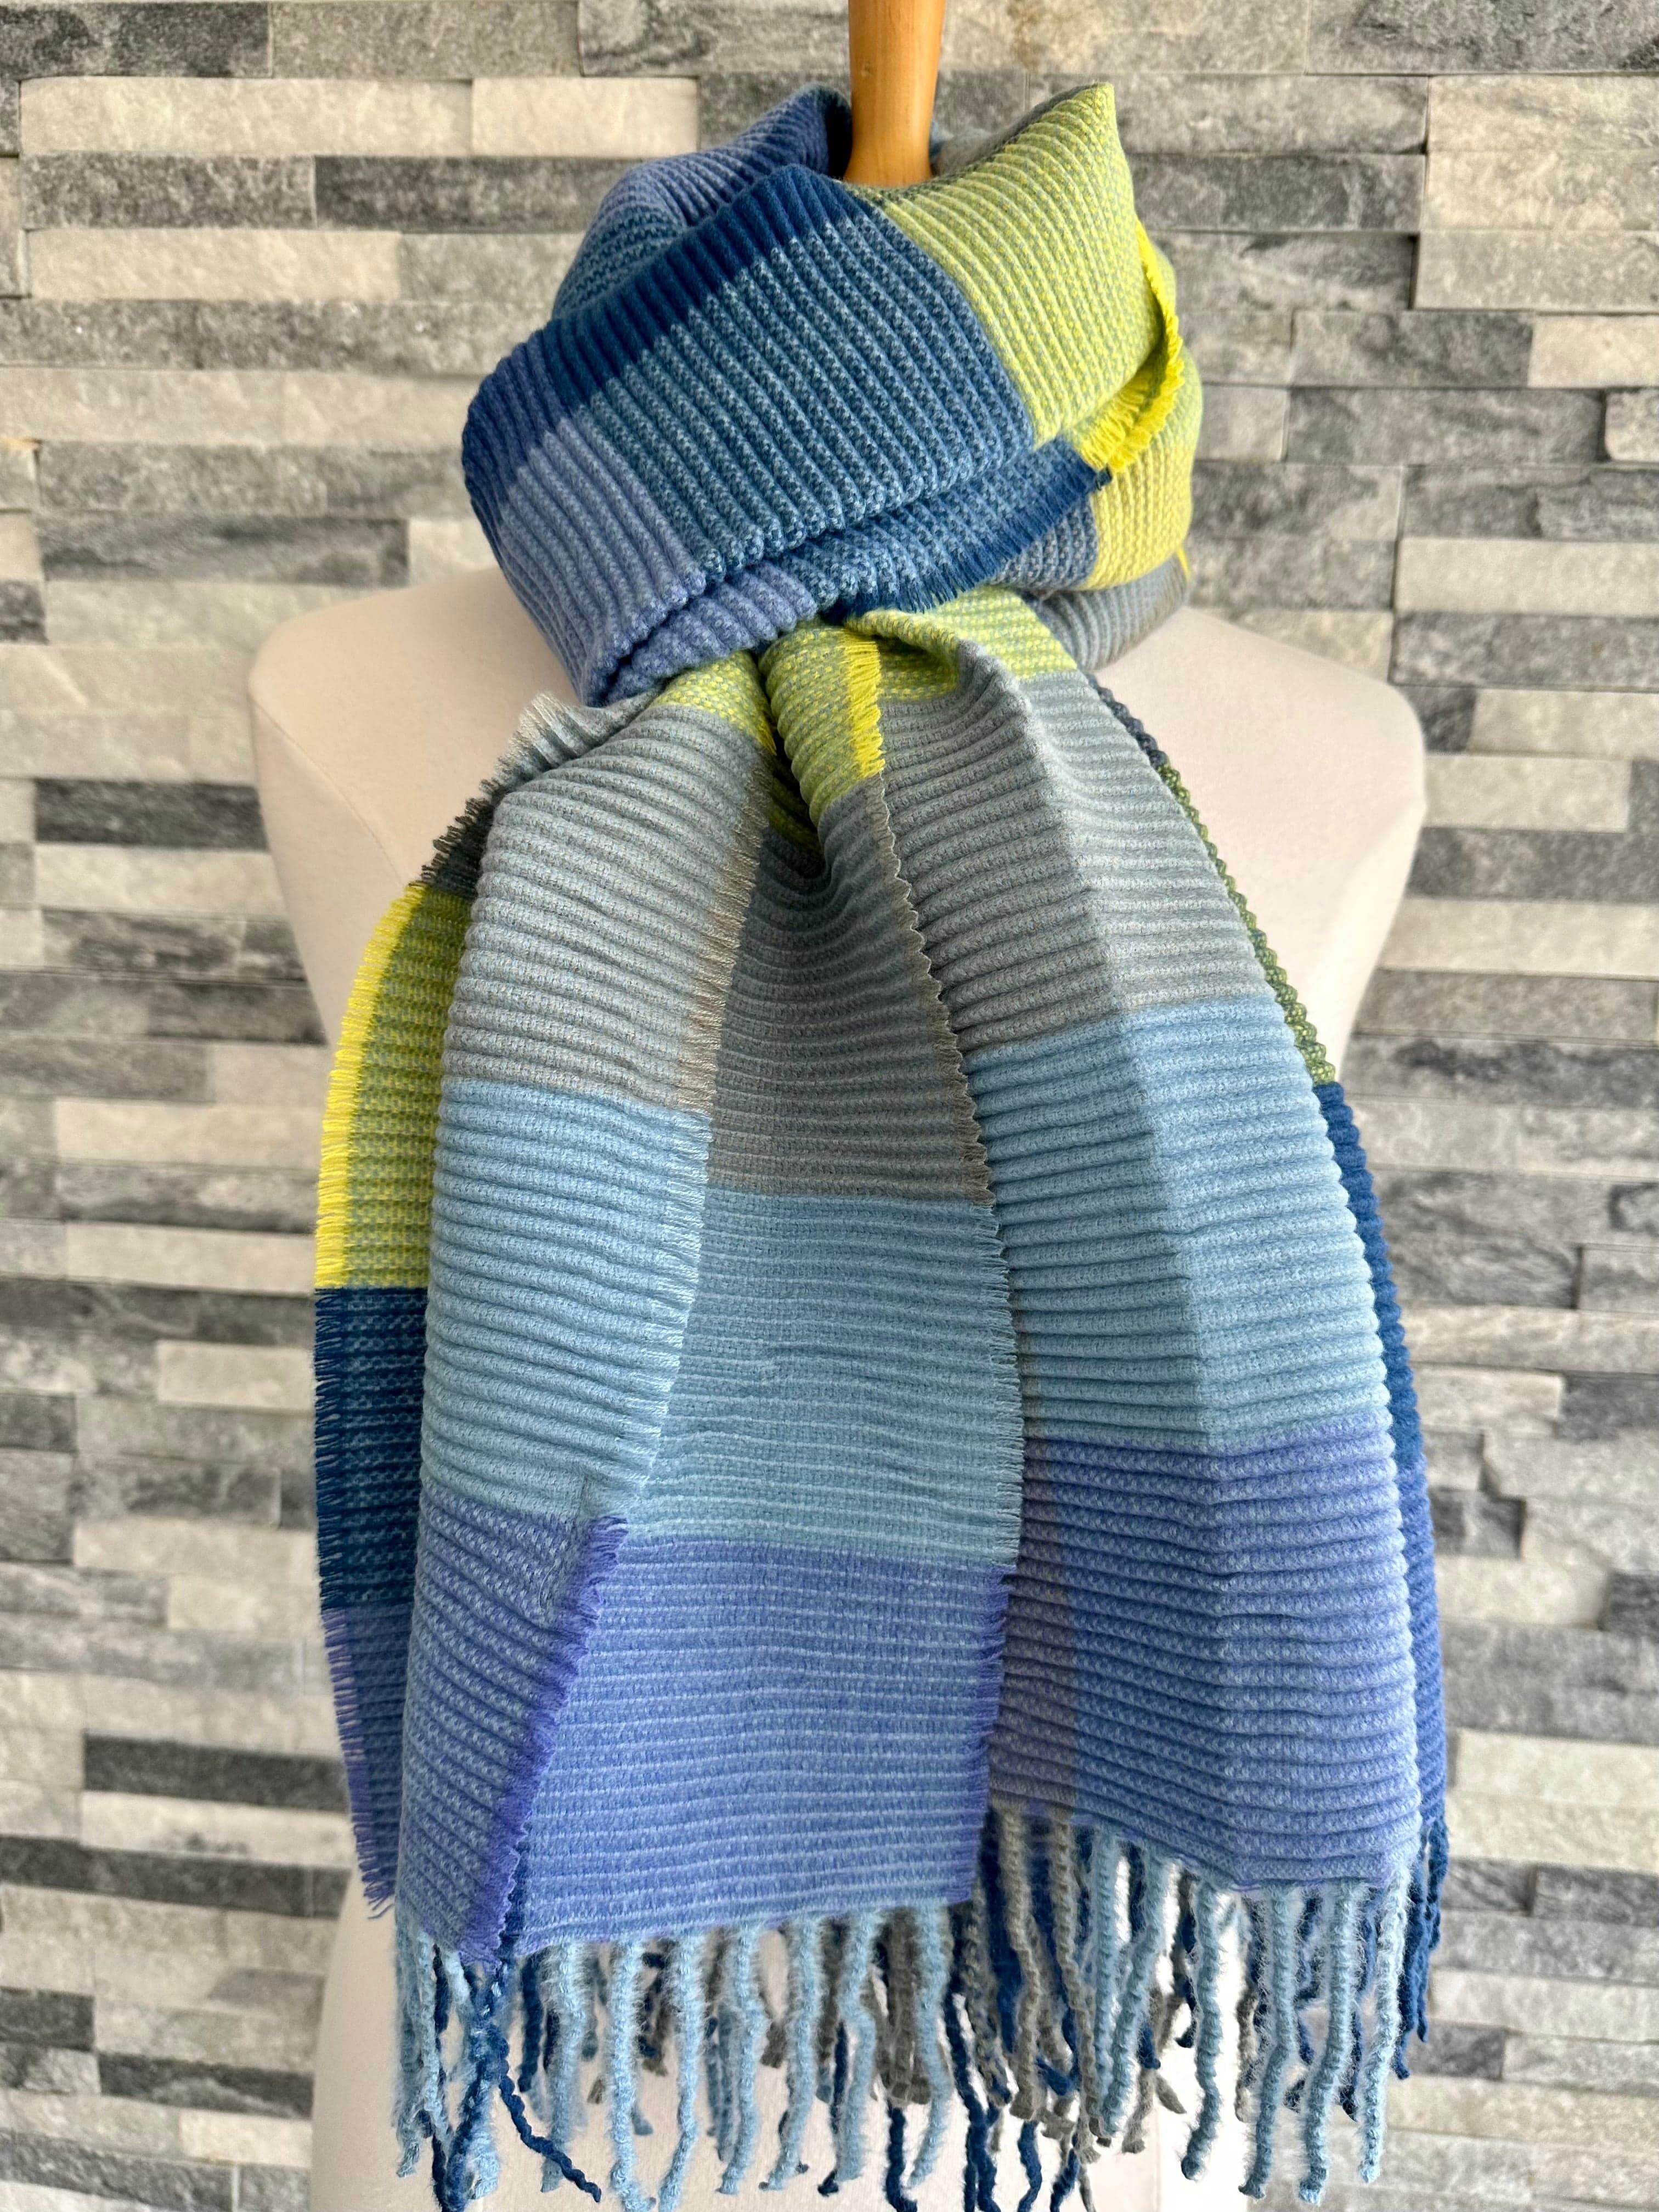 lusciousscarves Stretchy Blue, Grey and Yellow Scarf, Wool Blend